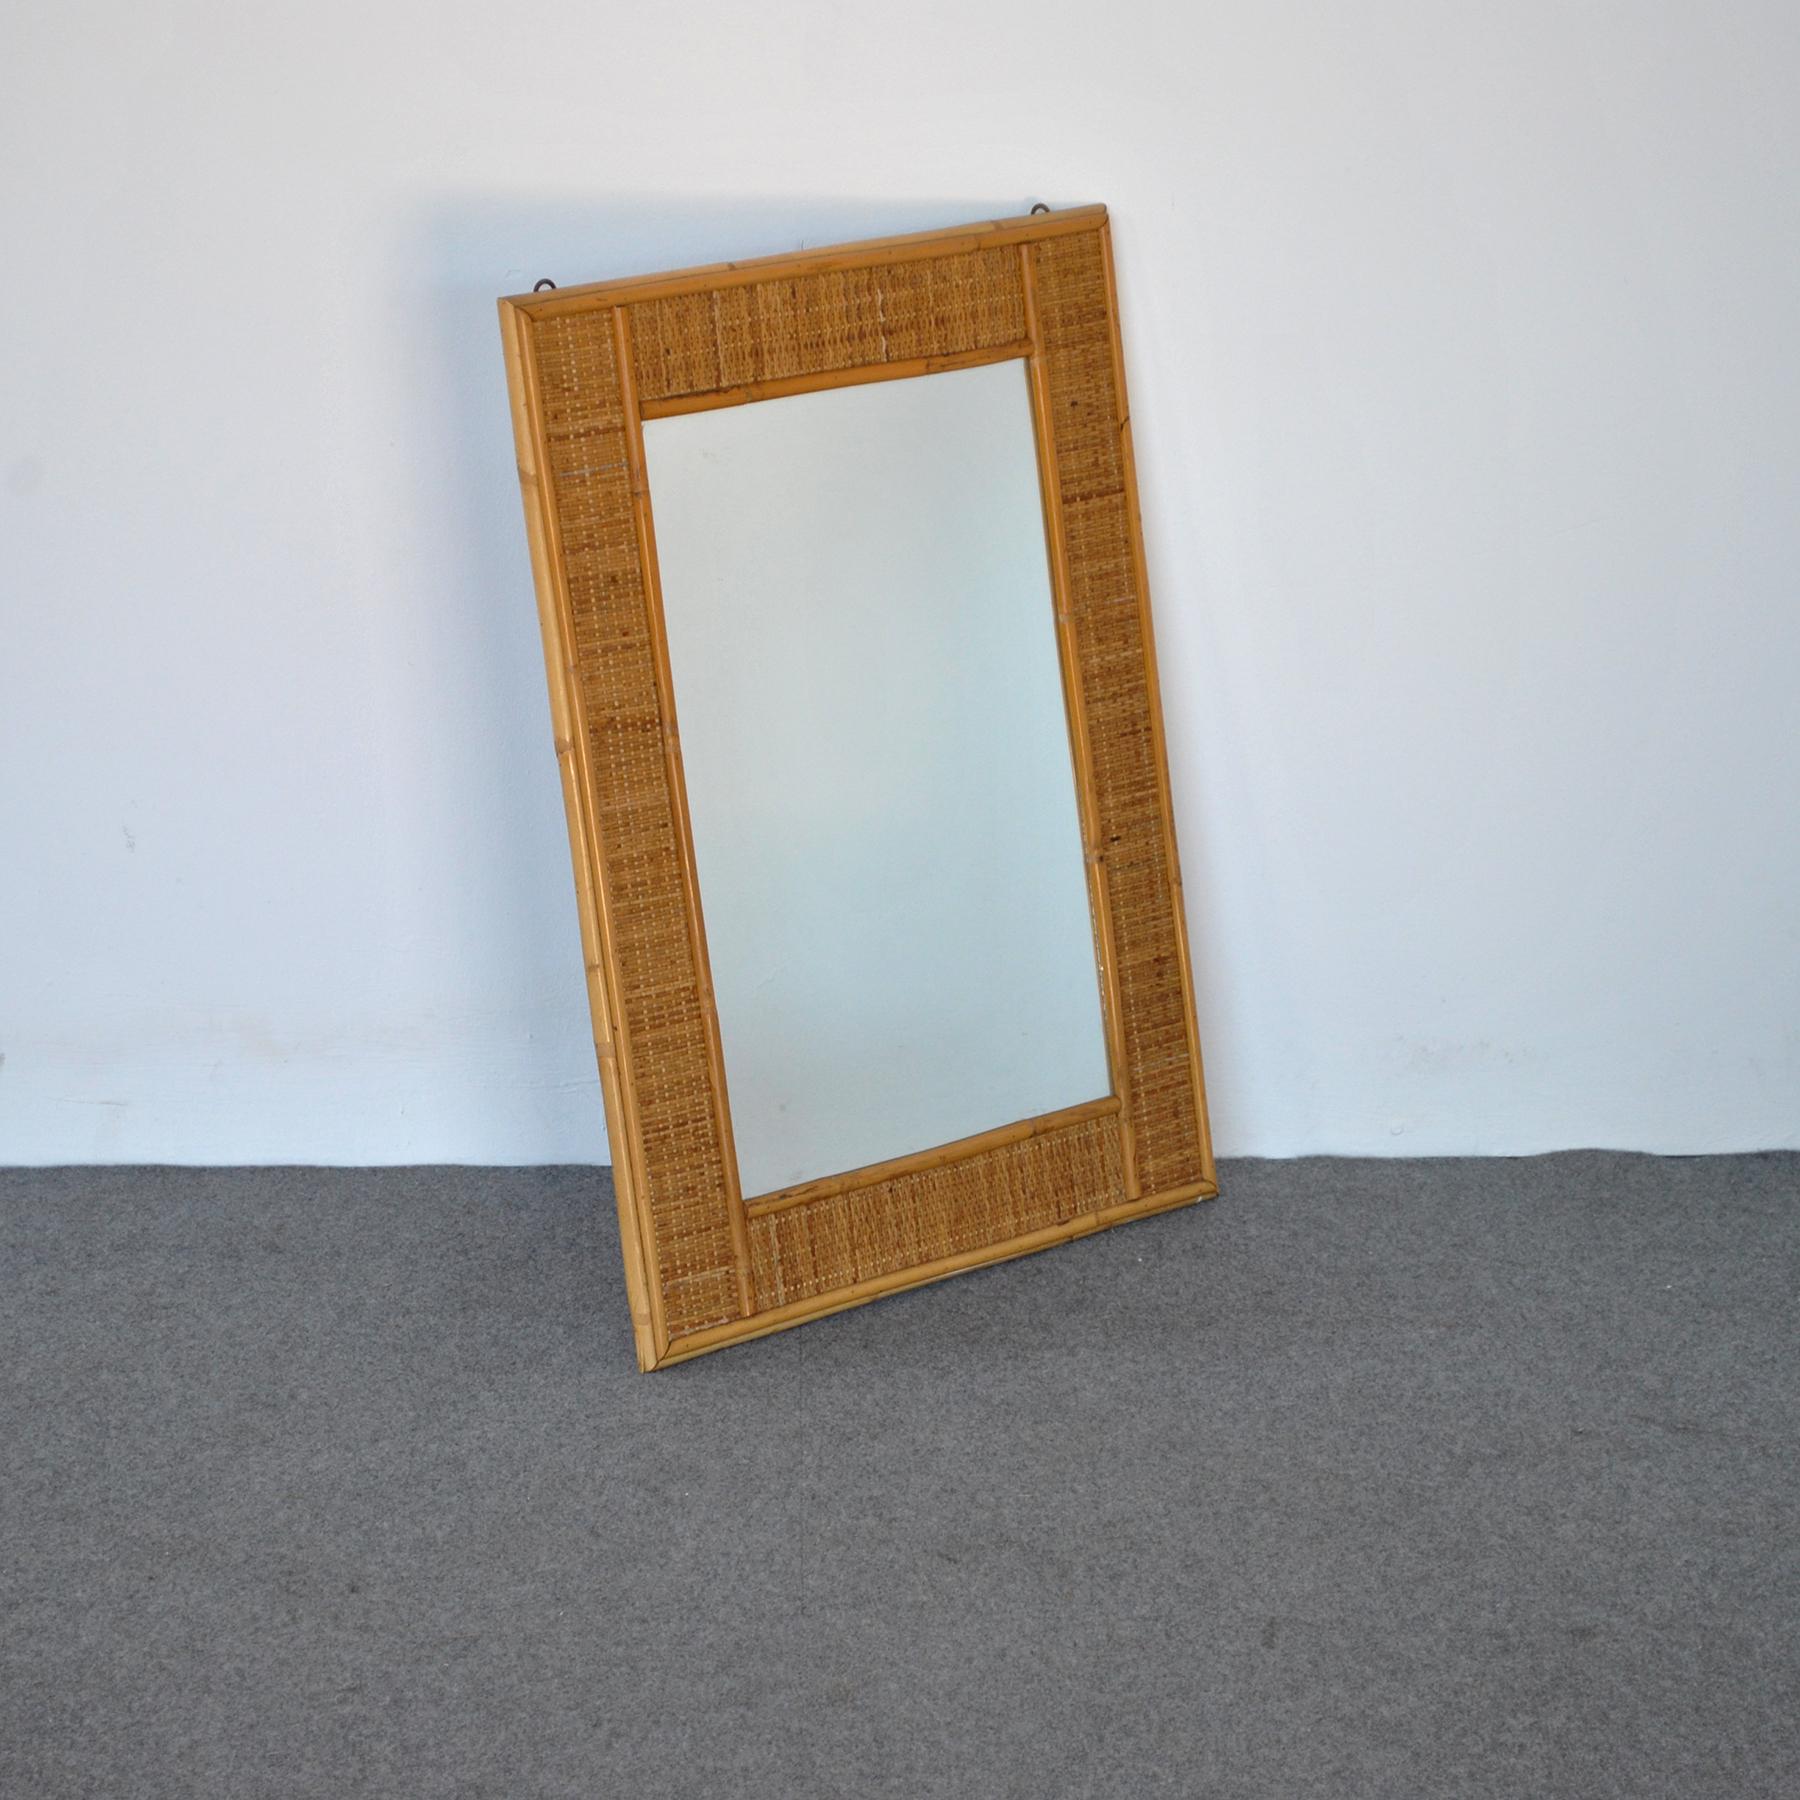 Mirror made in Italy from the late 1960s in wicker with bamboo profiles and frame.